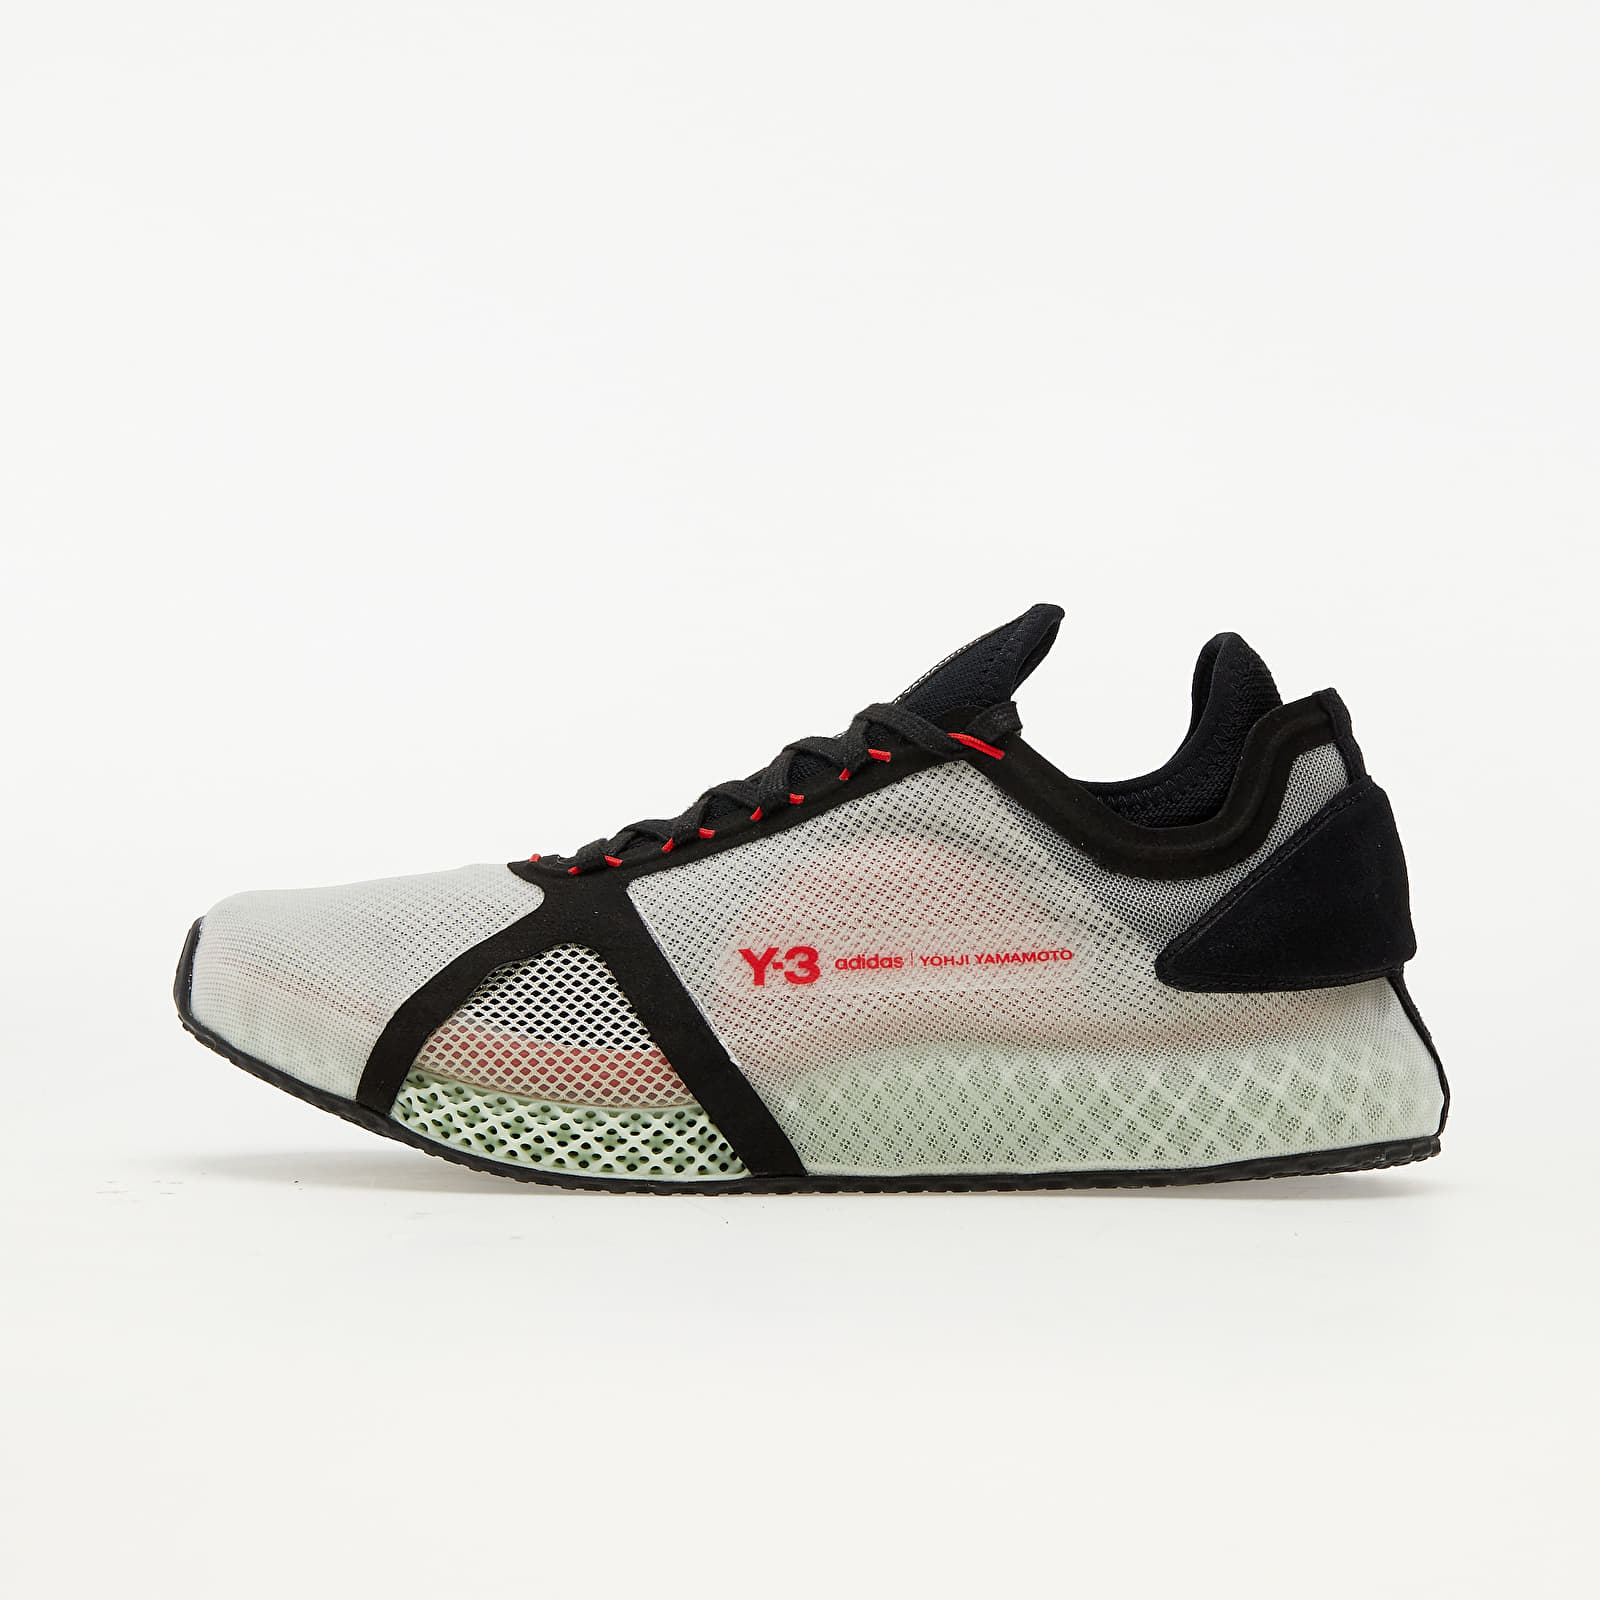 Pánske tenisky a topánky Y-3 Runner 4D Iow Clear Brown/ Black/ Red